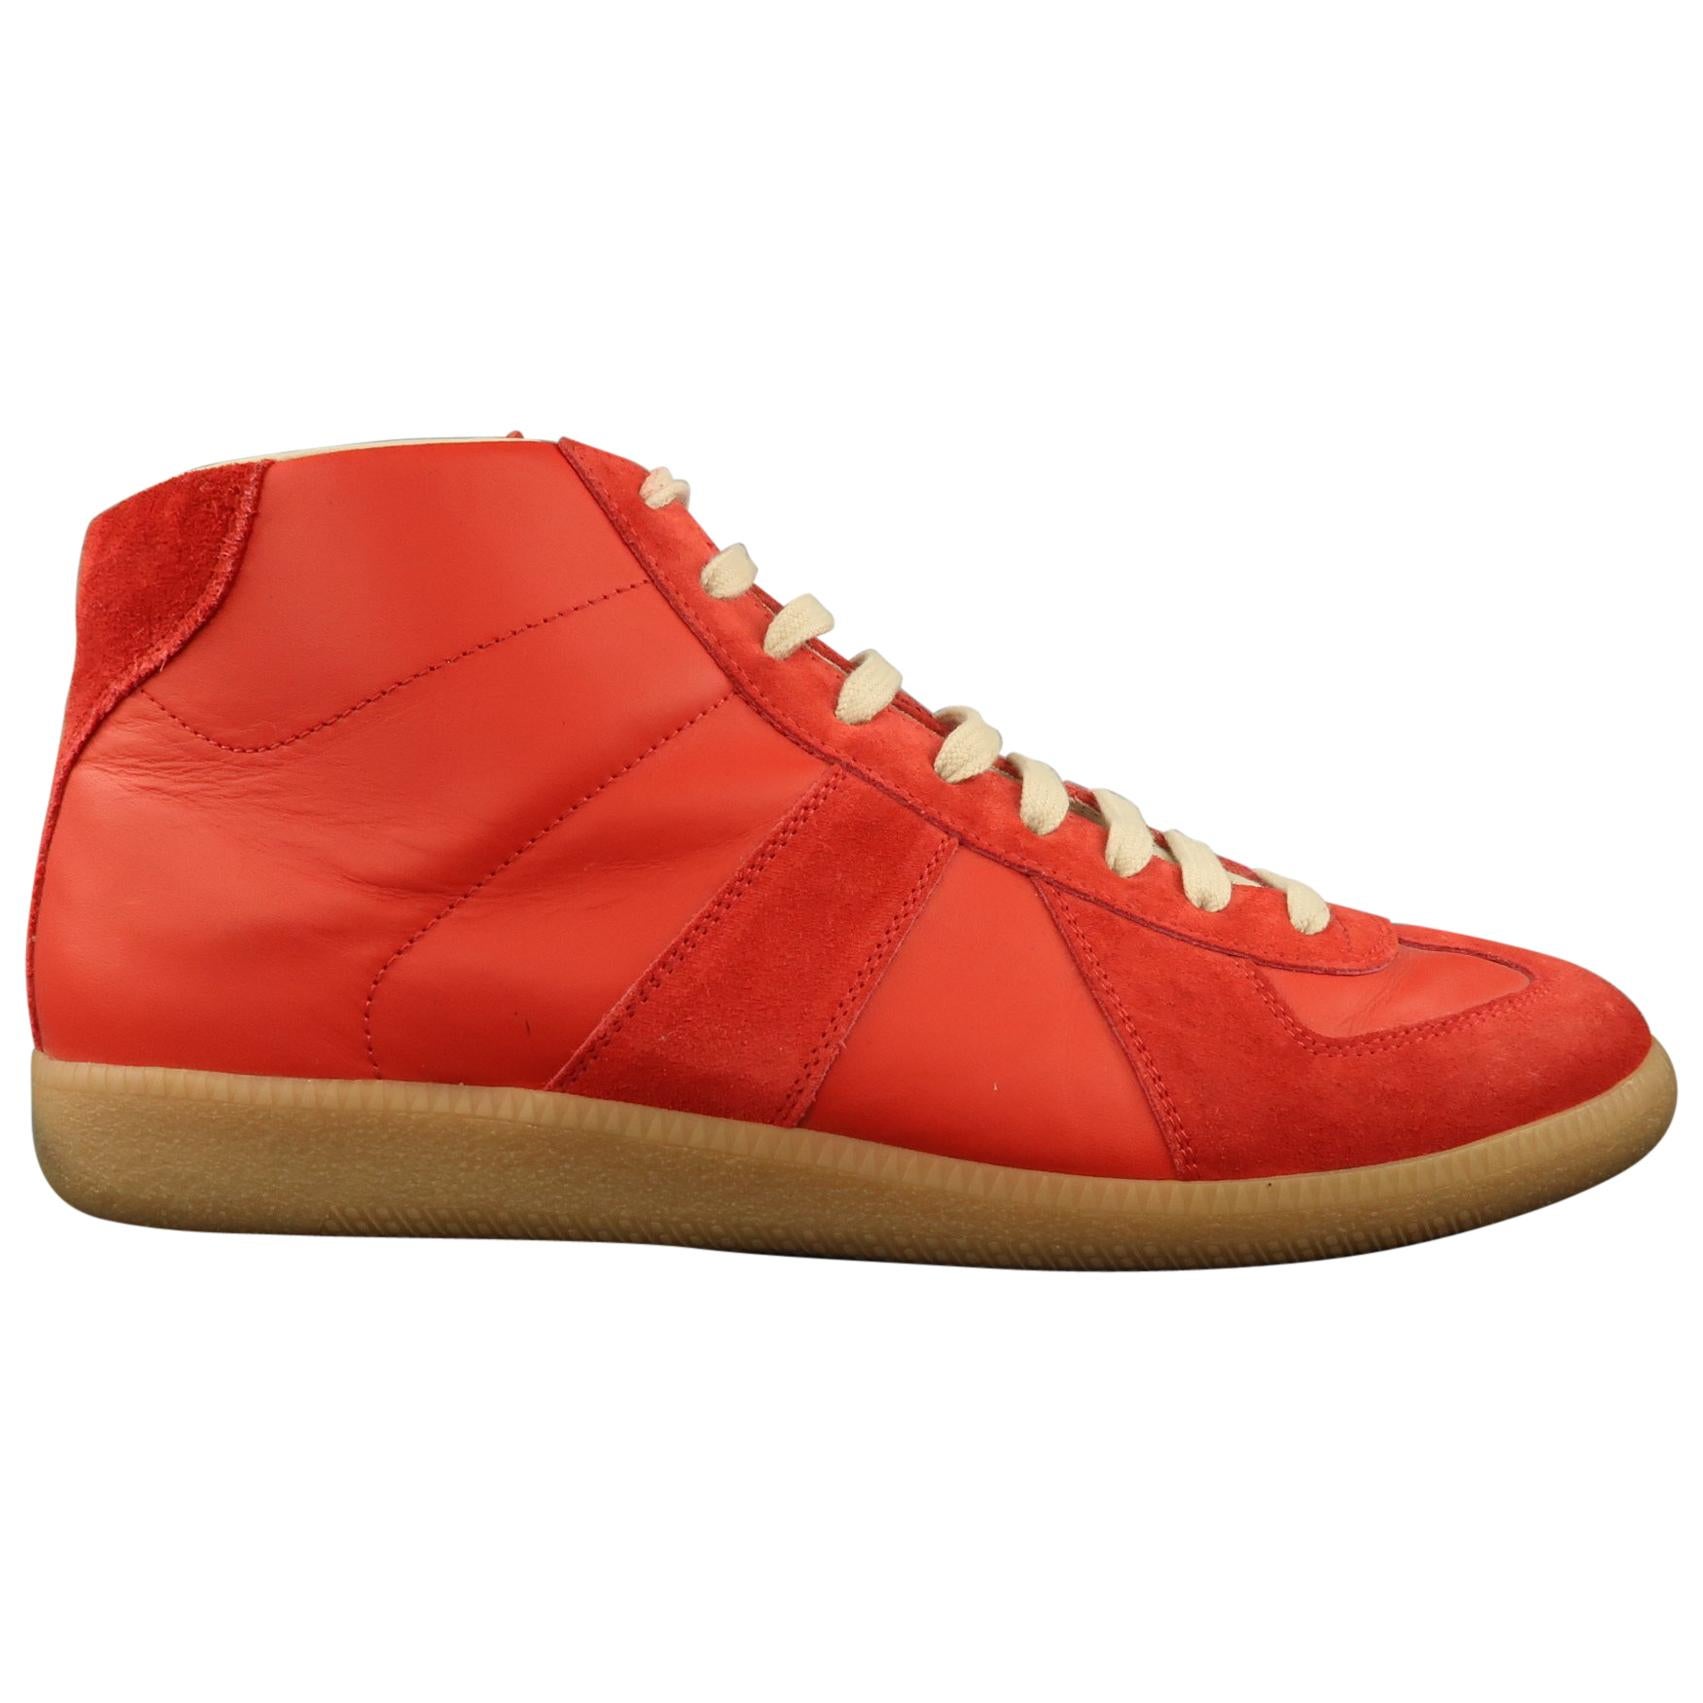 MAISON MARGIELA Size 10.5 Red Leather & Suede REPLICA High Top Sneakers